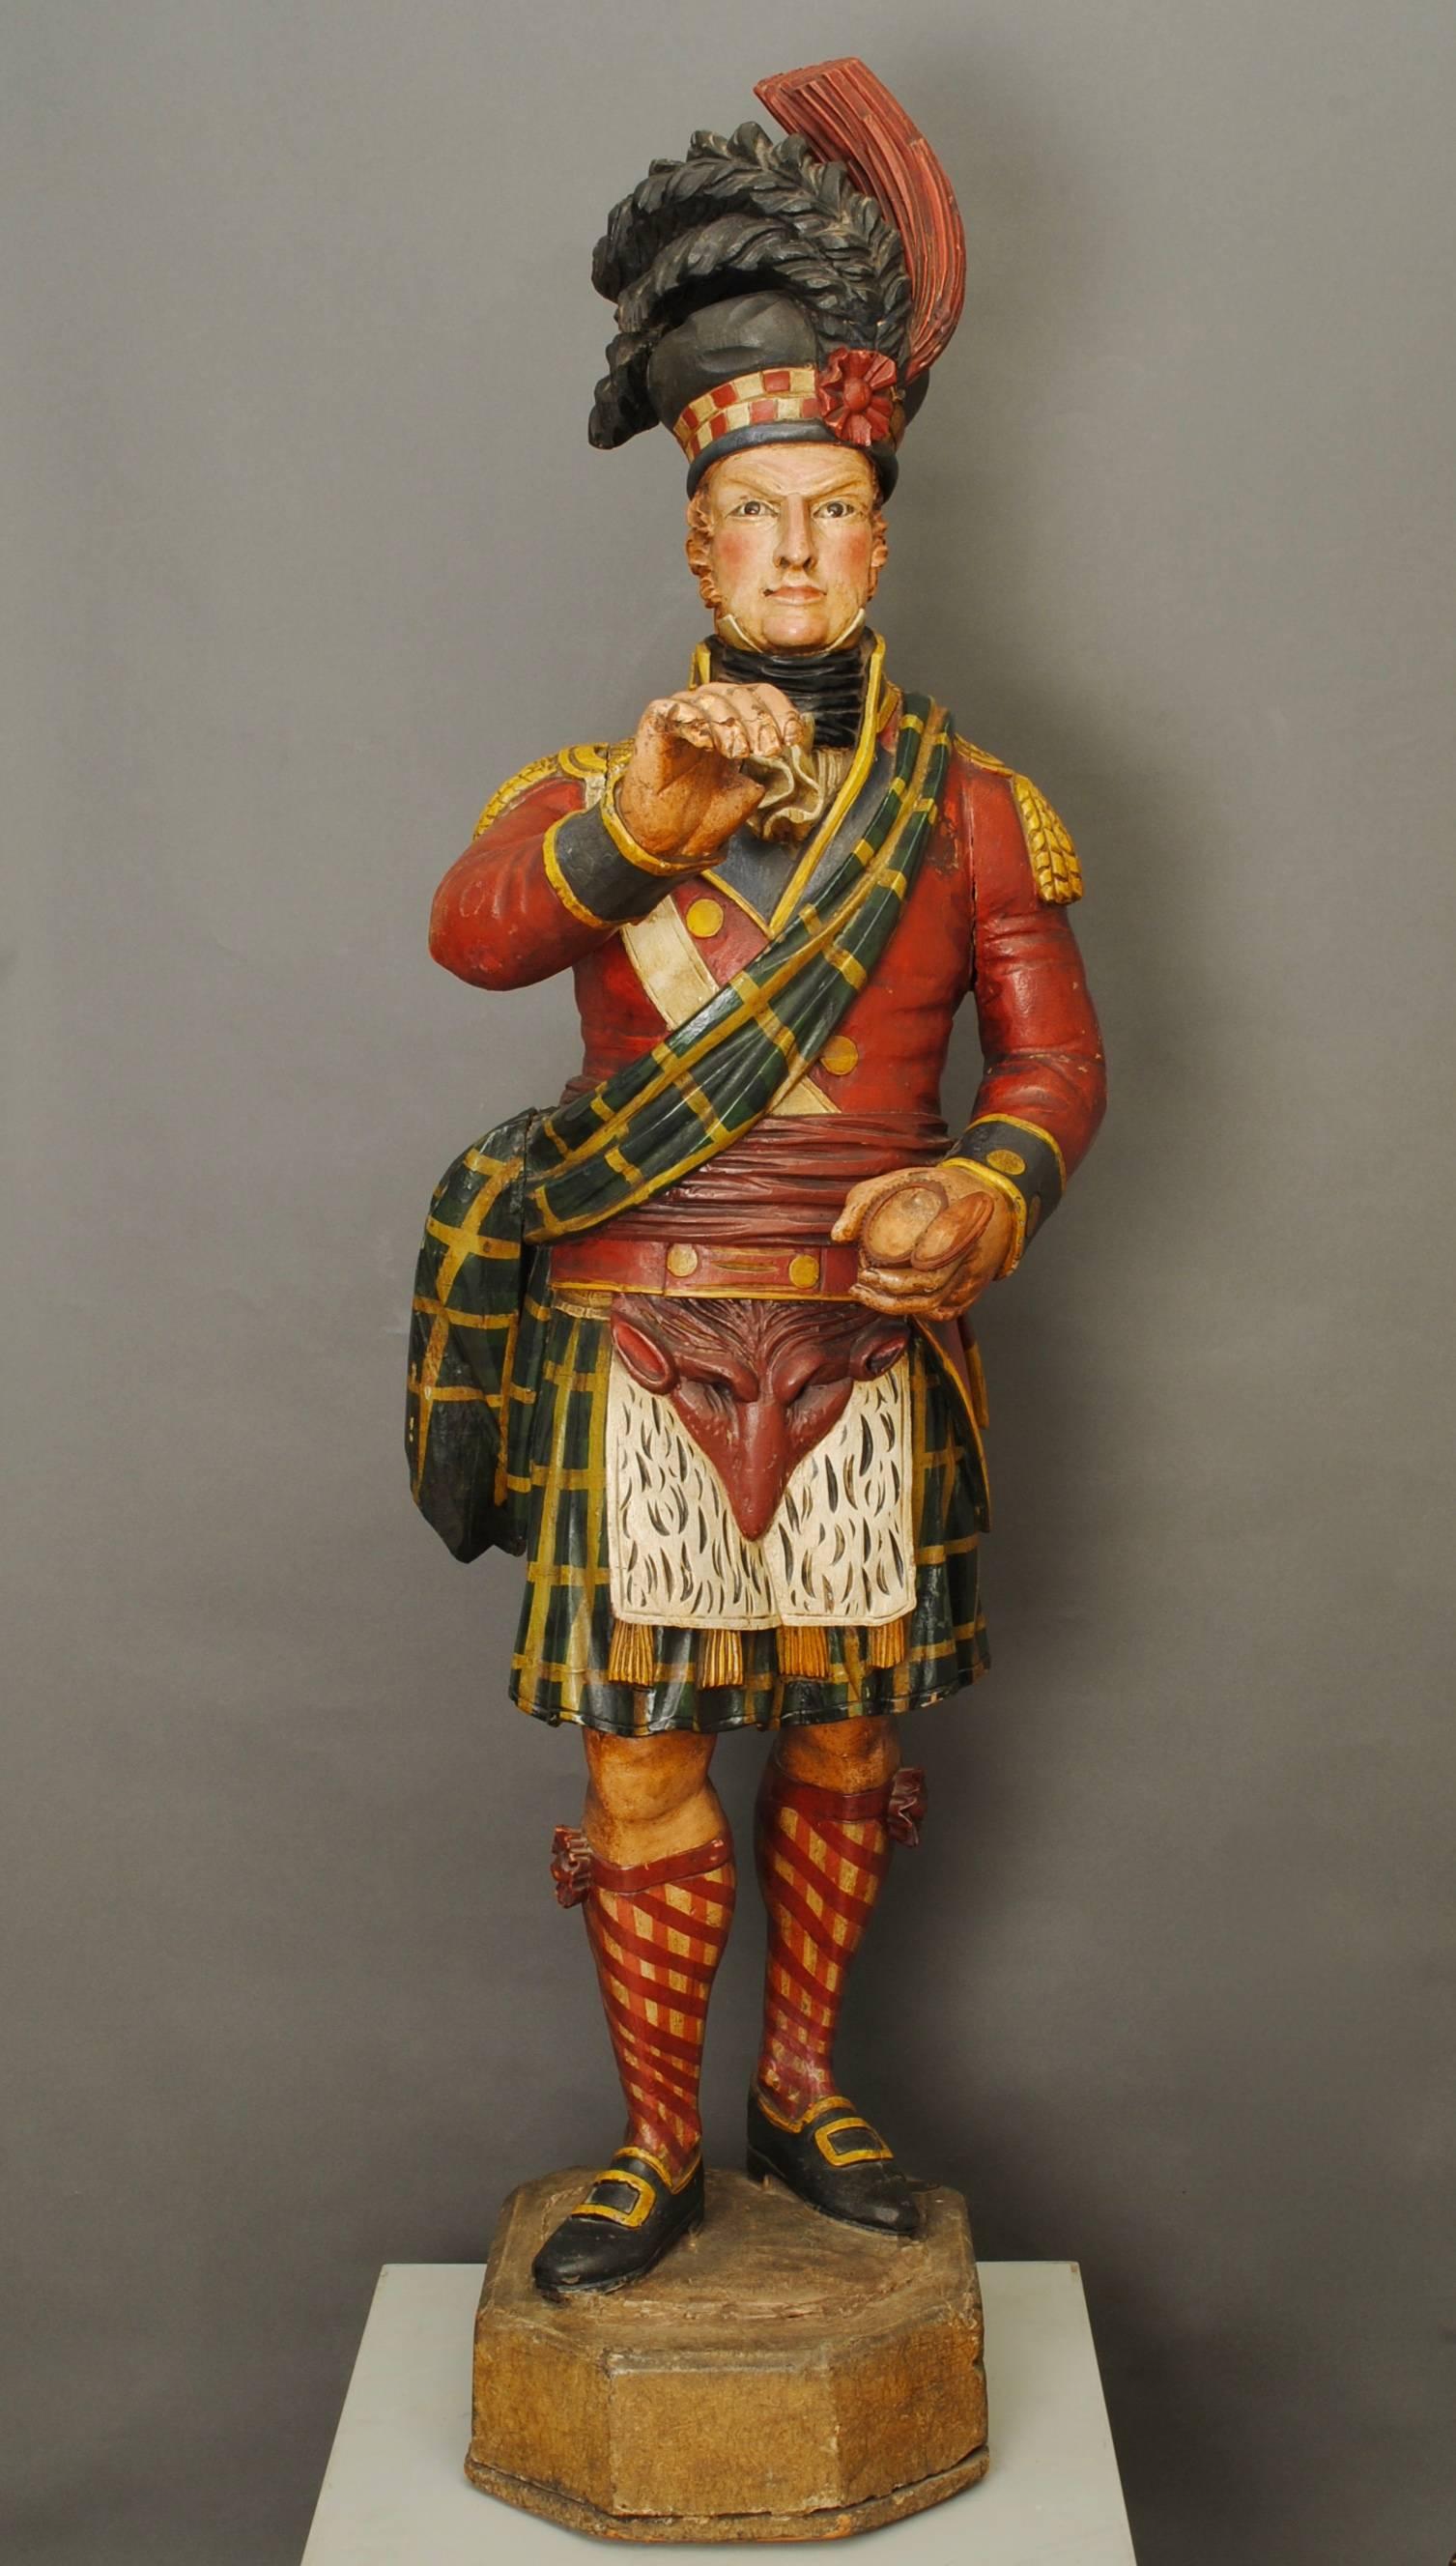 A wonderful example of a 19th century Scottish highlander tobacconists figure in full dress uniform, retaining the original painted polychromed decoration and with glass eyes. Provenance, The imperial tobacco company private museum with metal